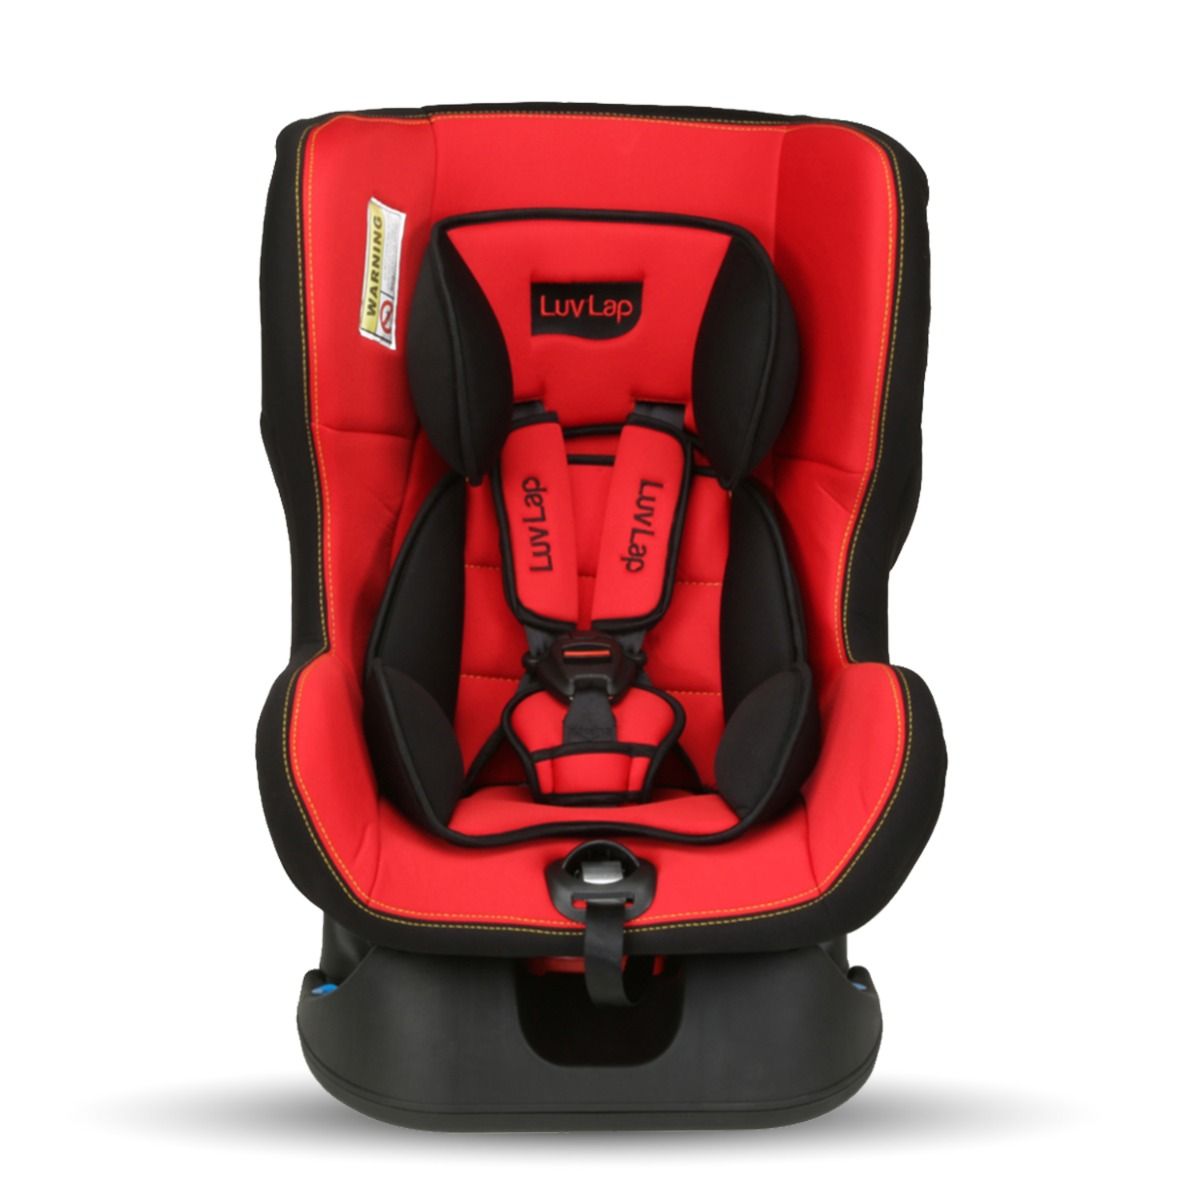 LuvLap Sports Car Seat for Kids reviews in 2023